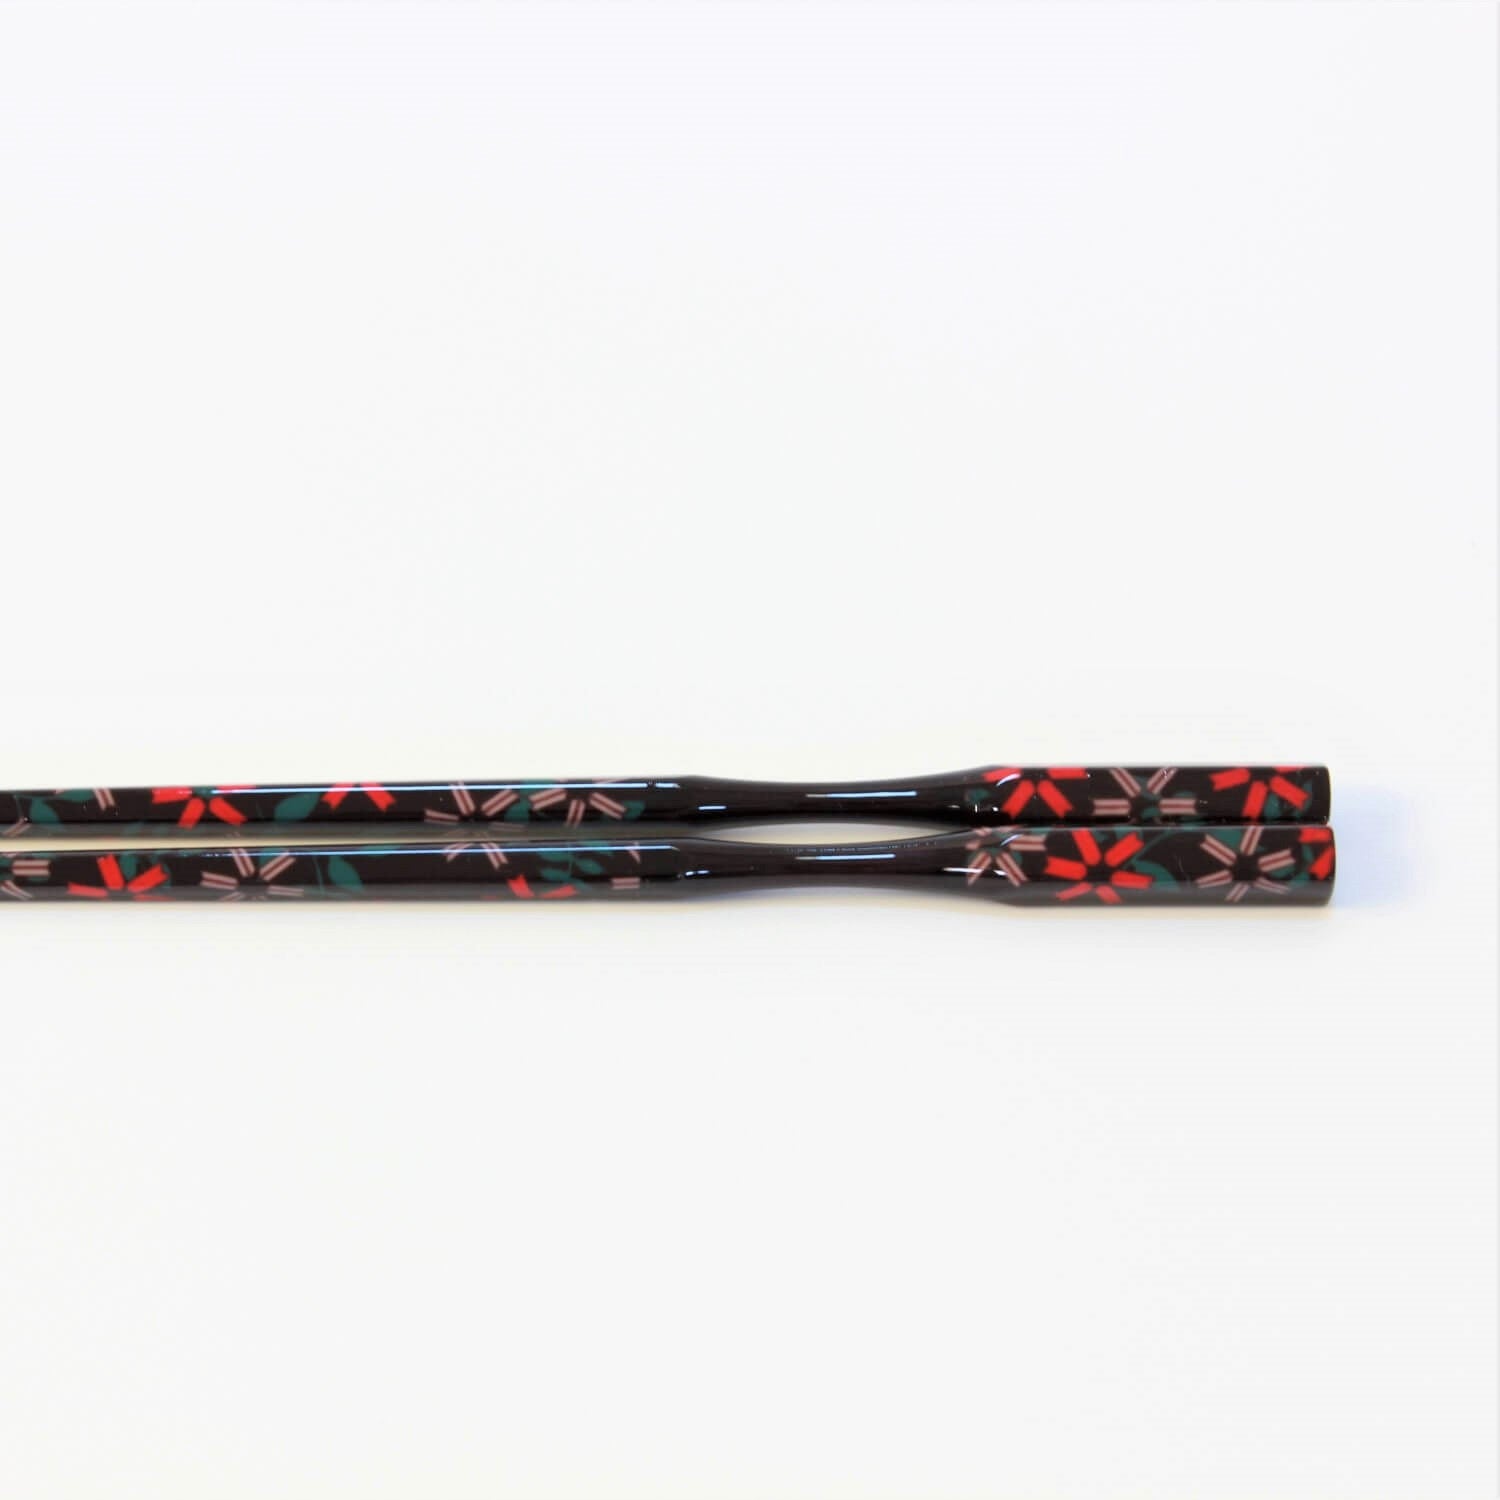 japanese chopsticks laying flat showing curved neck